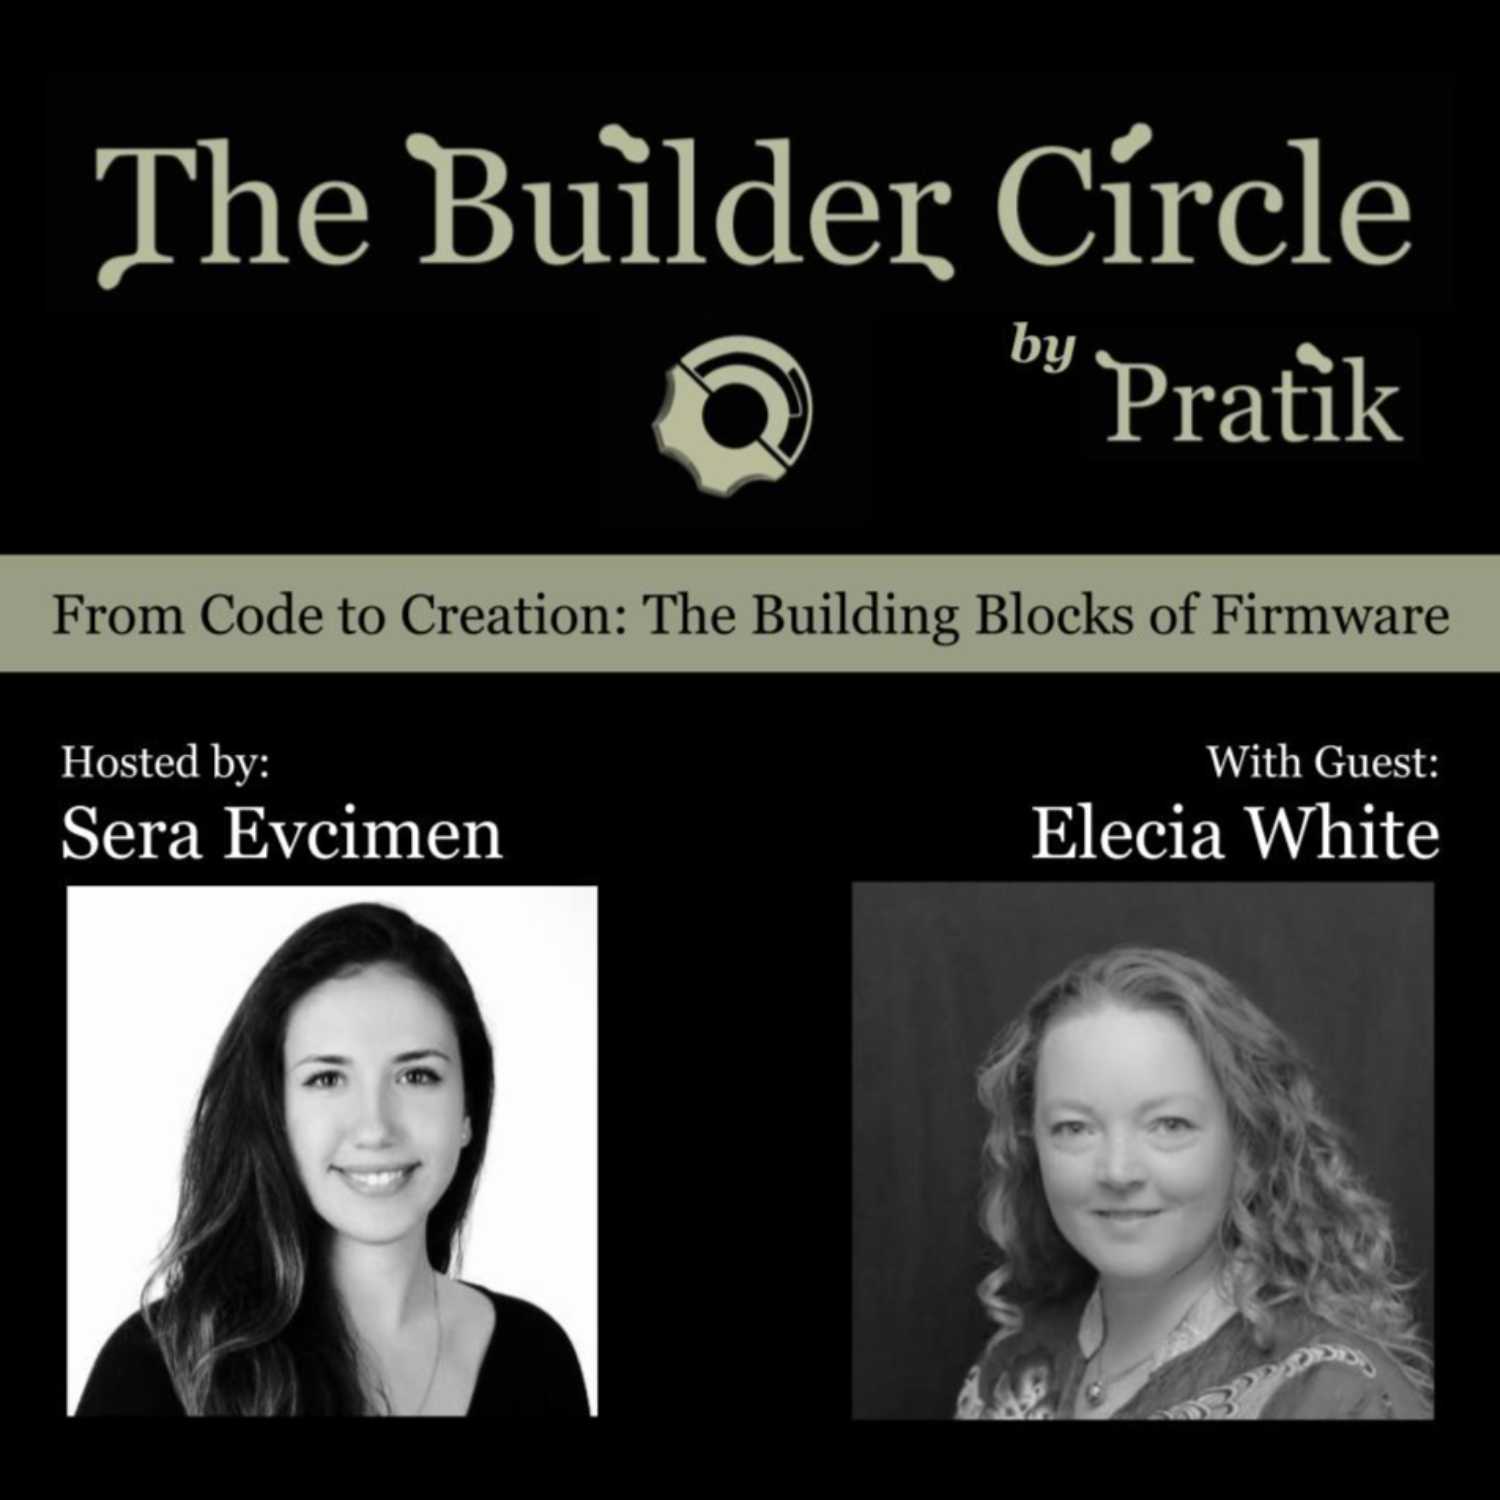 S2 E1: From Code to Creation: The Building Blocks of Firmware with Elecia White